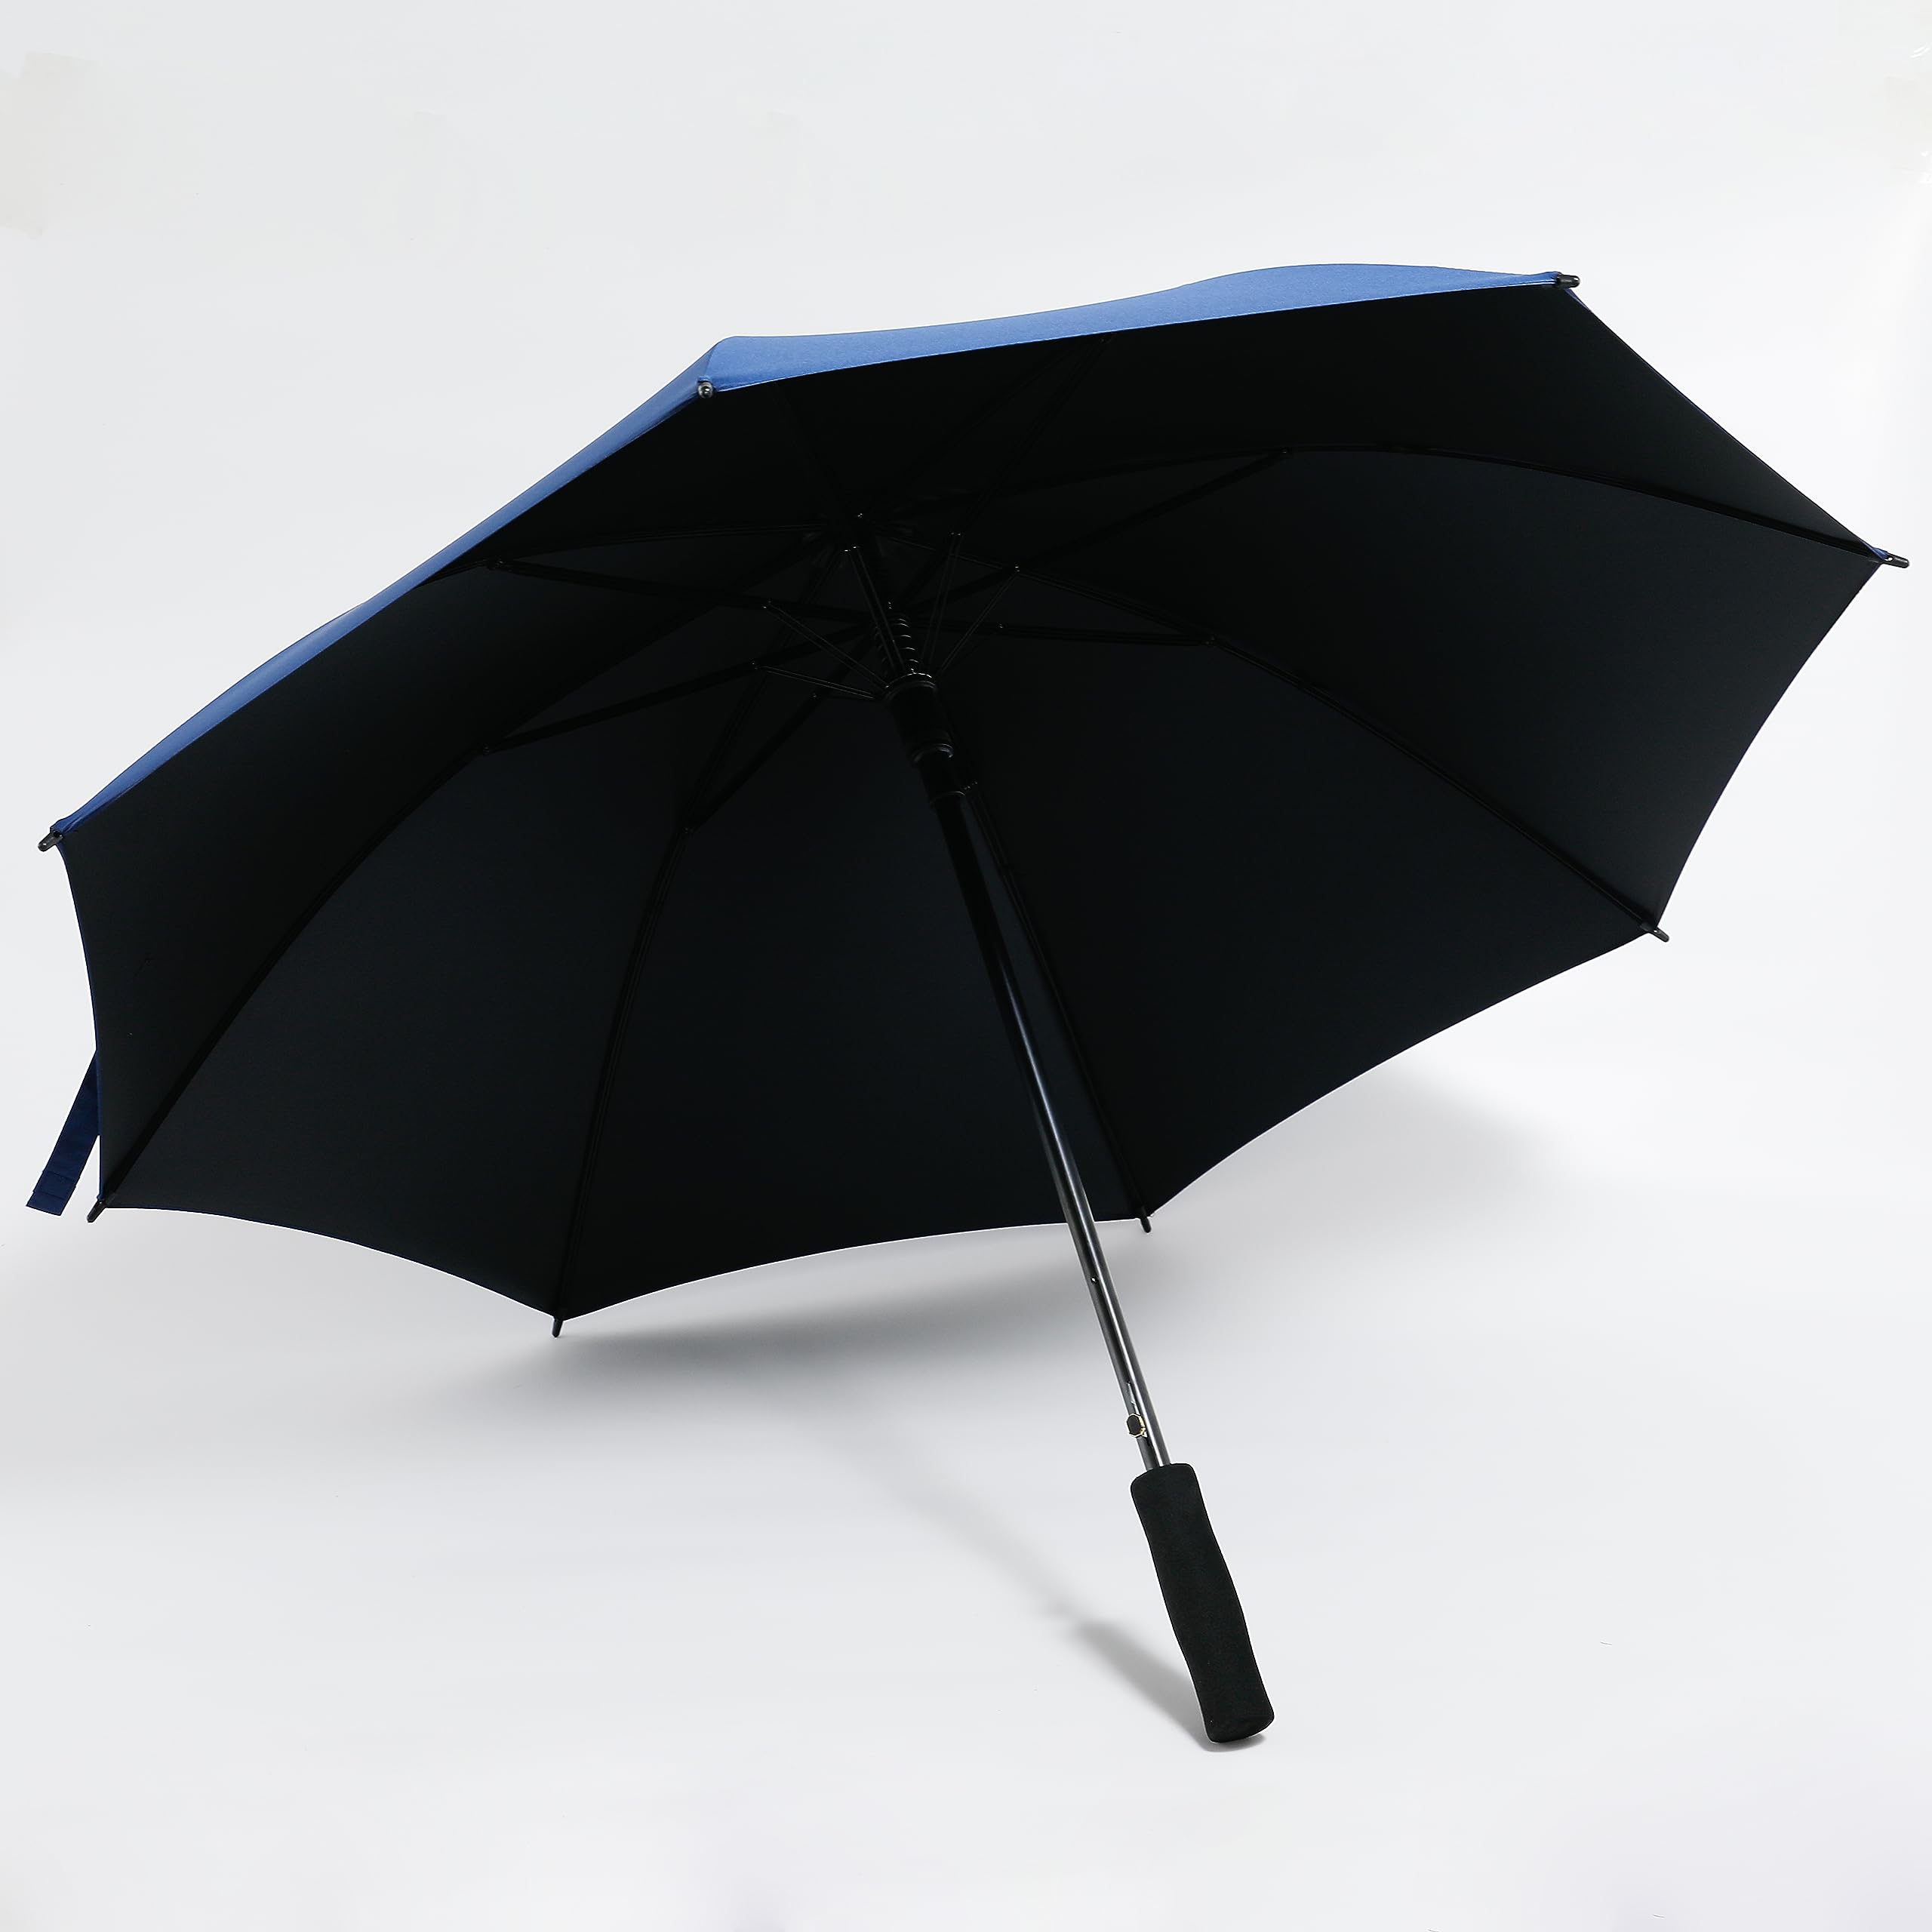 ABSORBIA 8K Straight and Stick Umbrella for rain, Windproof, Waterproof and UV proof black Coated | Open Diameter 105cm Double Layer Umbrella With Cover|Navy Blue……